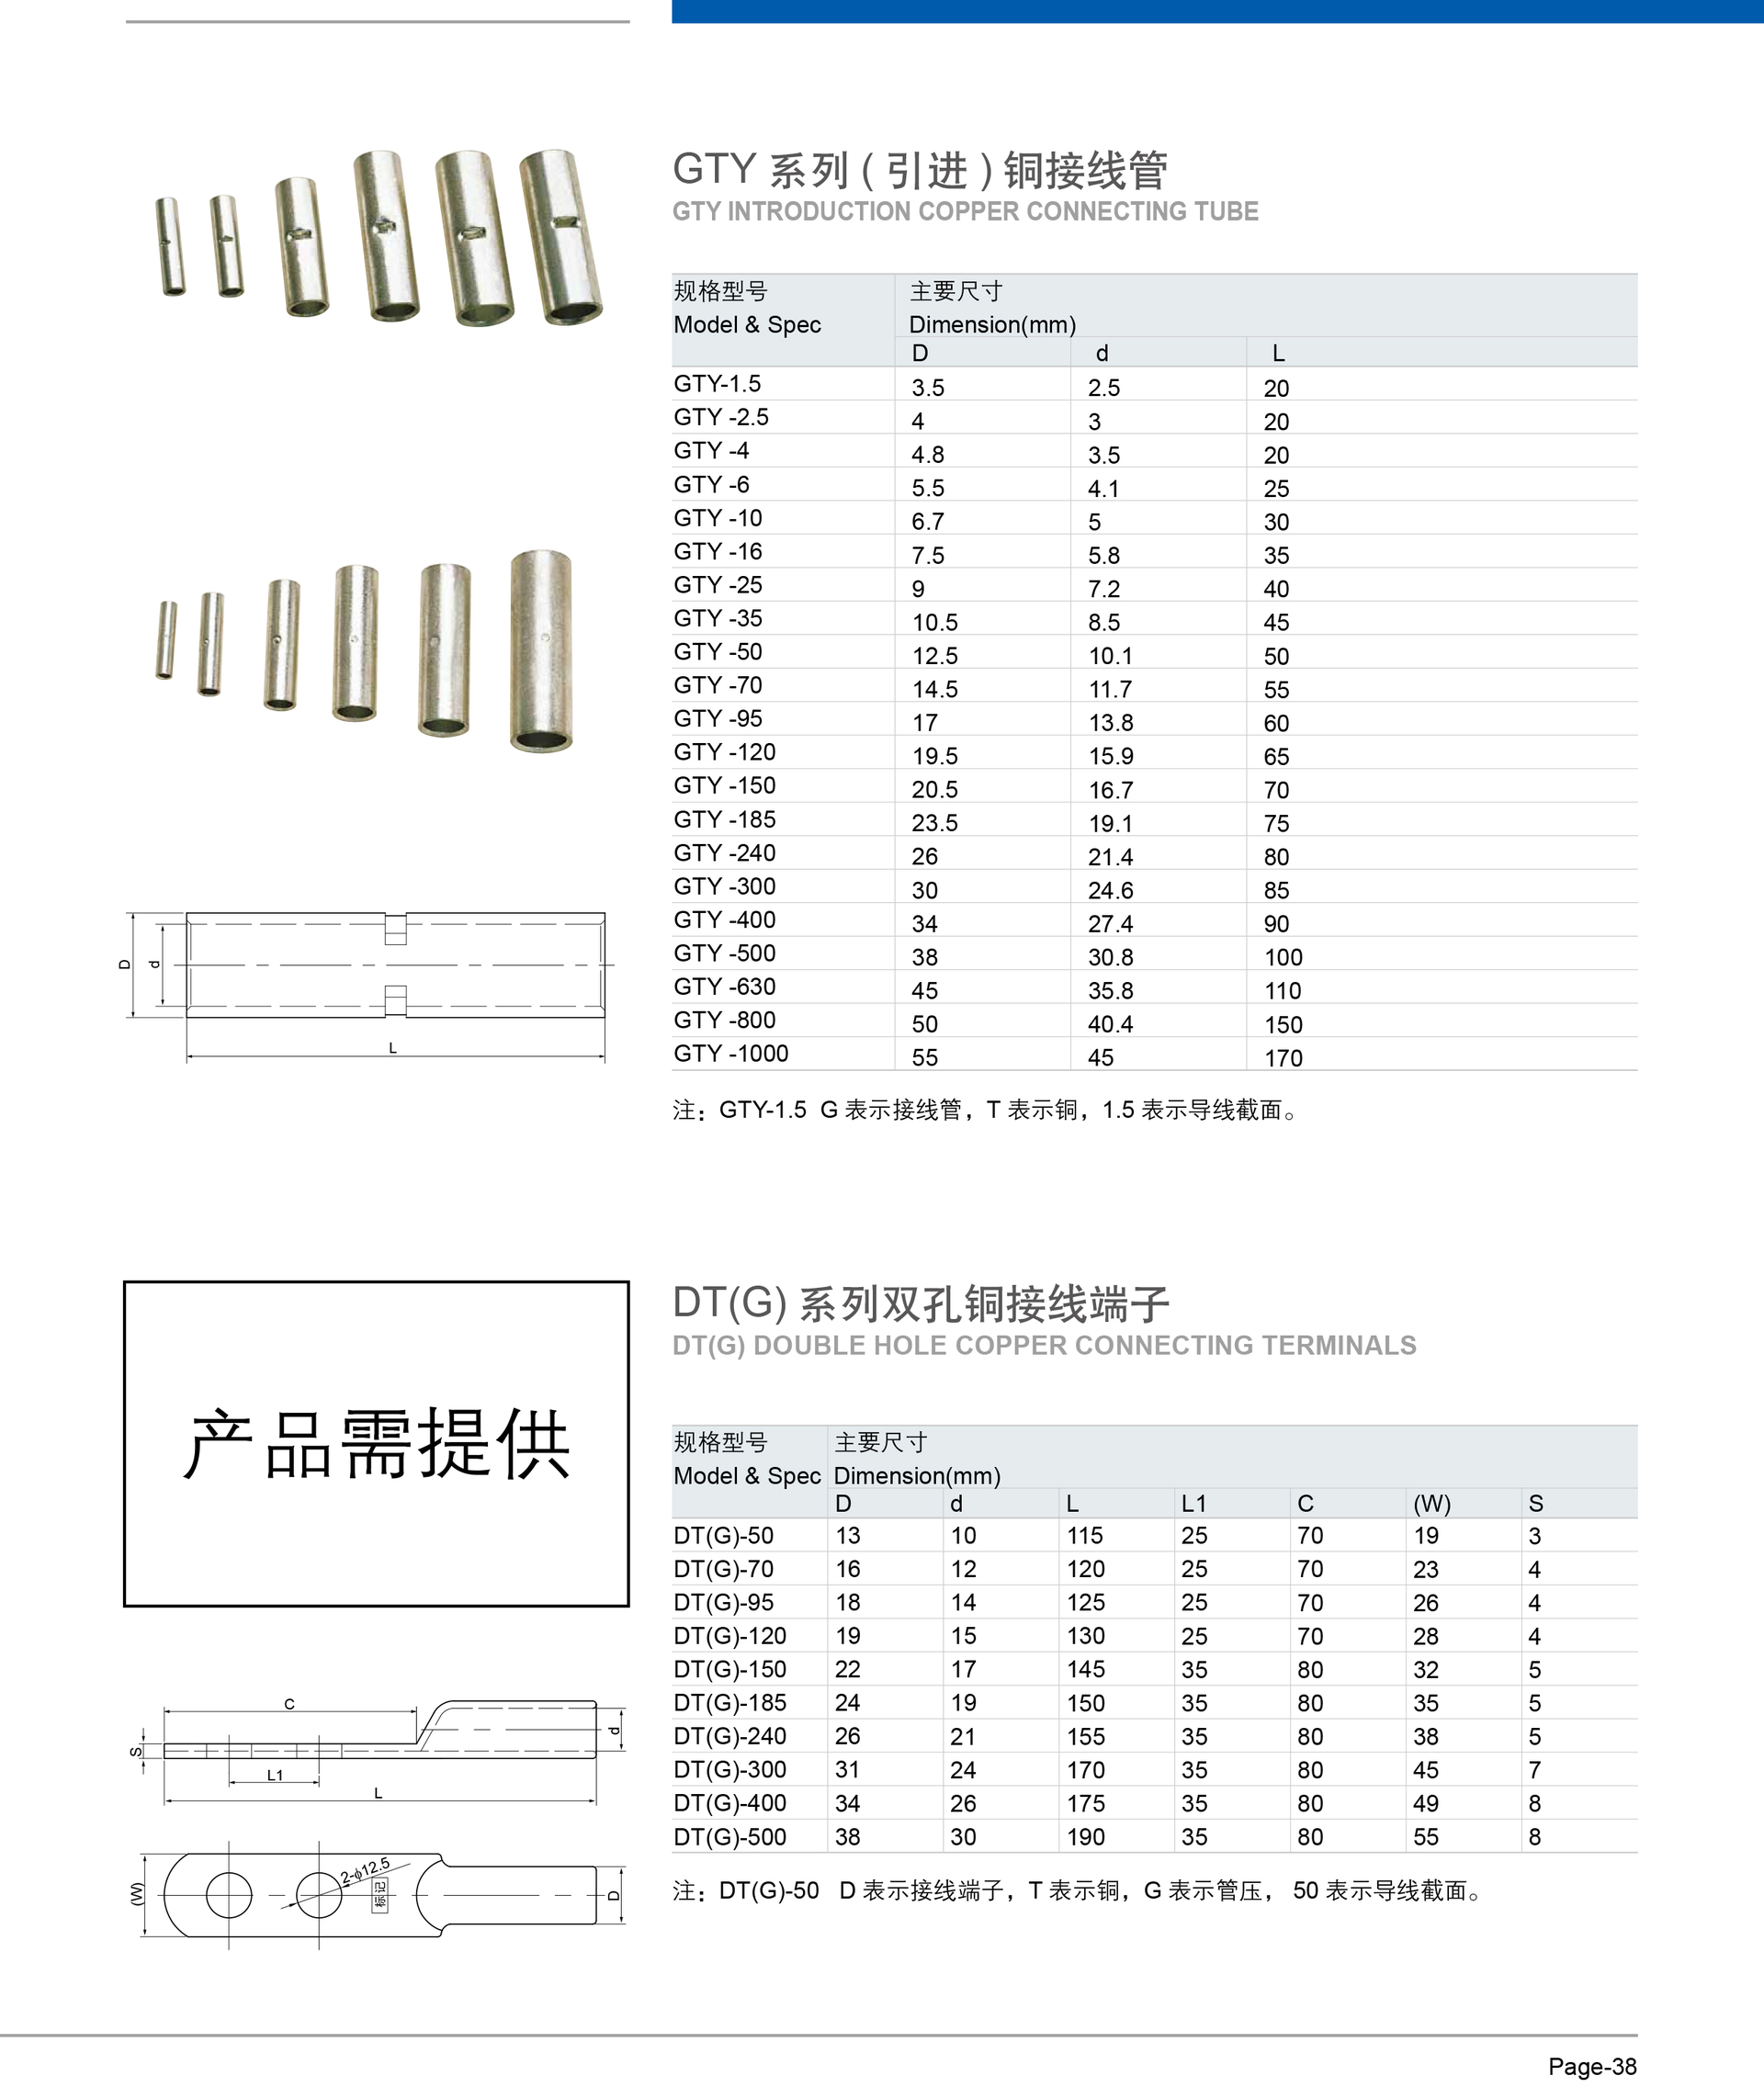 MKS durable electrical connectors factory price for fly-frame